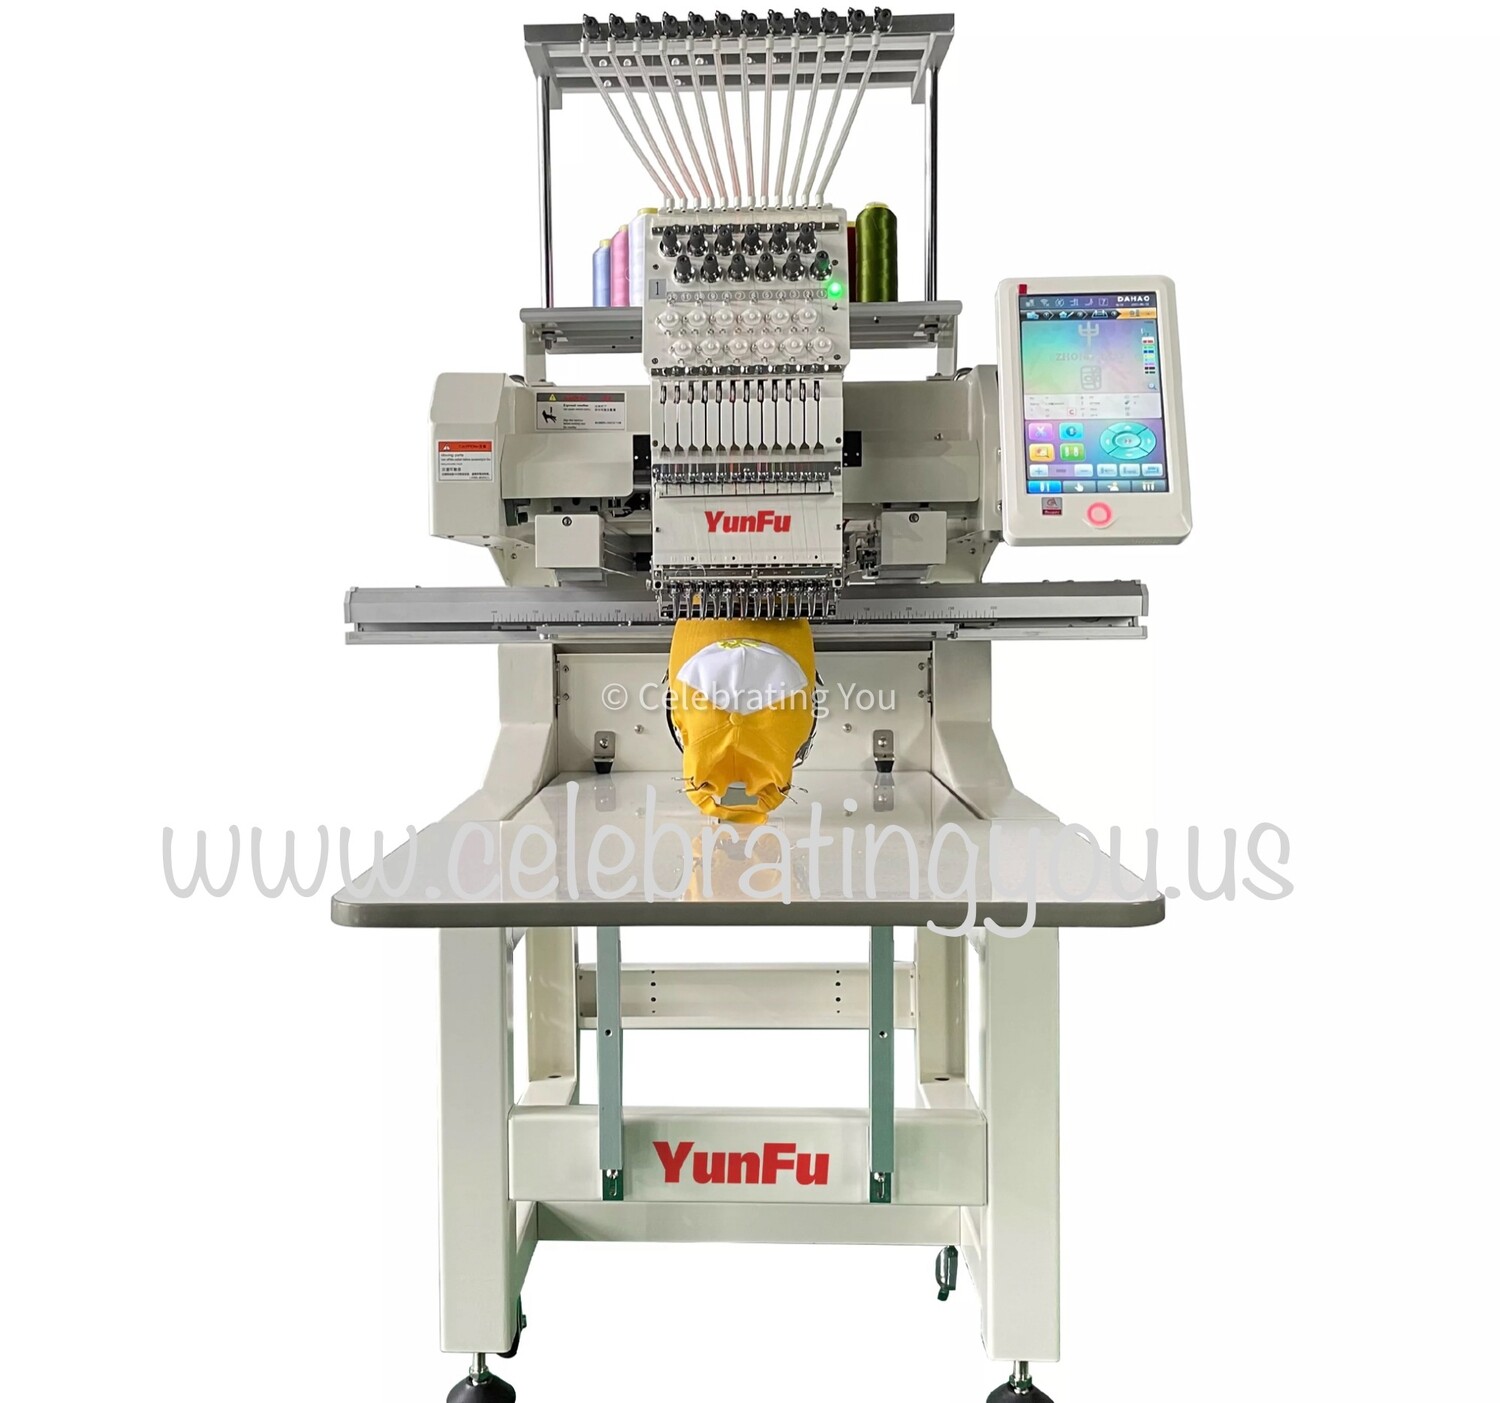 YungFu Customizable 12 or 15 Needle Single Head Commercial Embroidery Machine up to 1200 RPM Speed with a 10" Color LCD Touch Screen with optional Cording, Color Loose Beads and Color Sequins